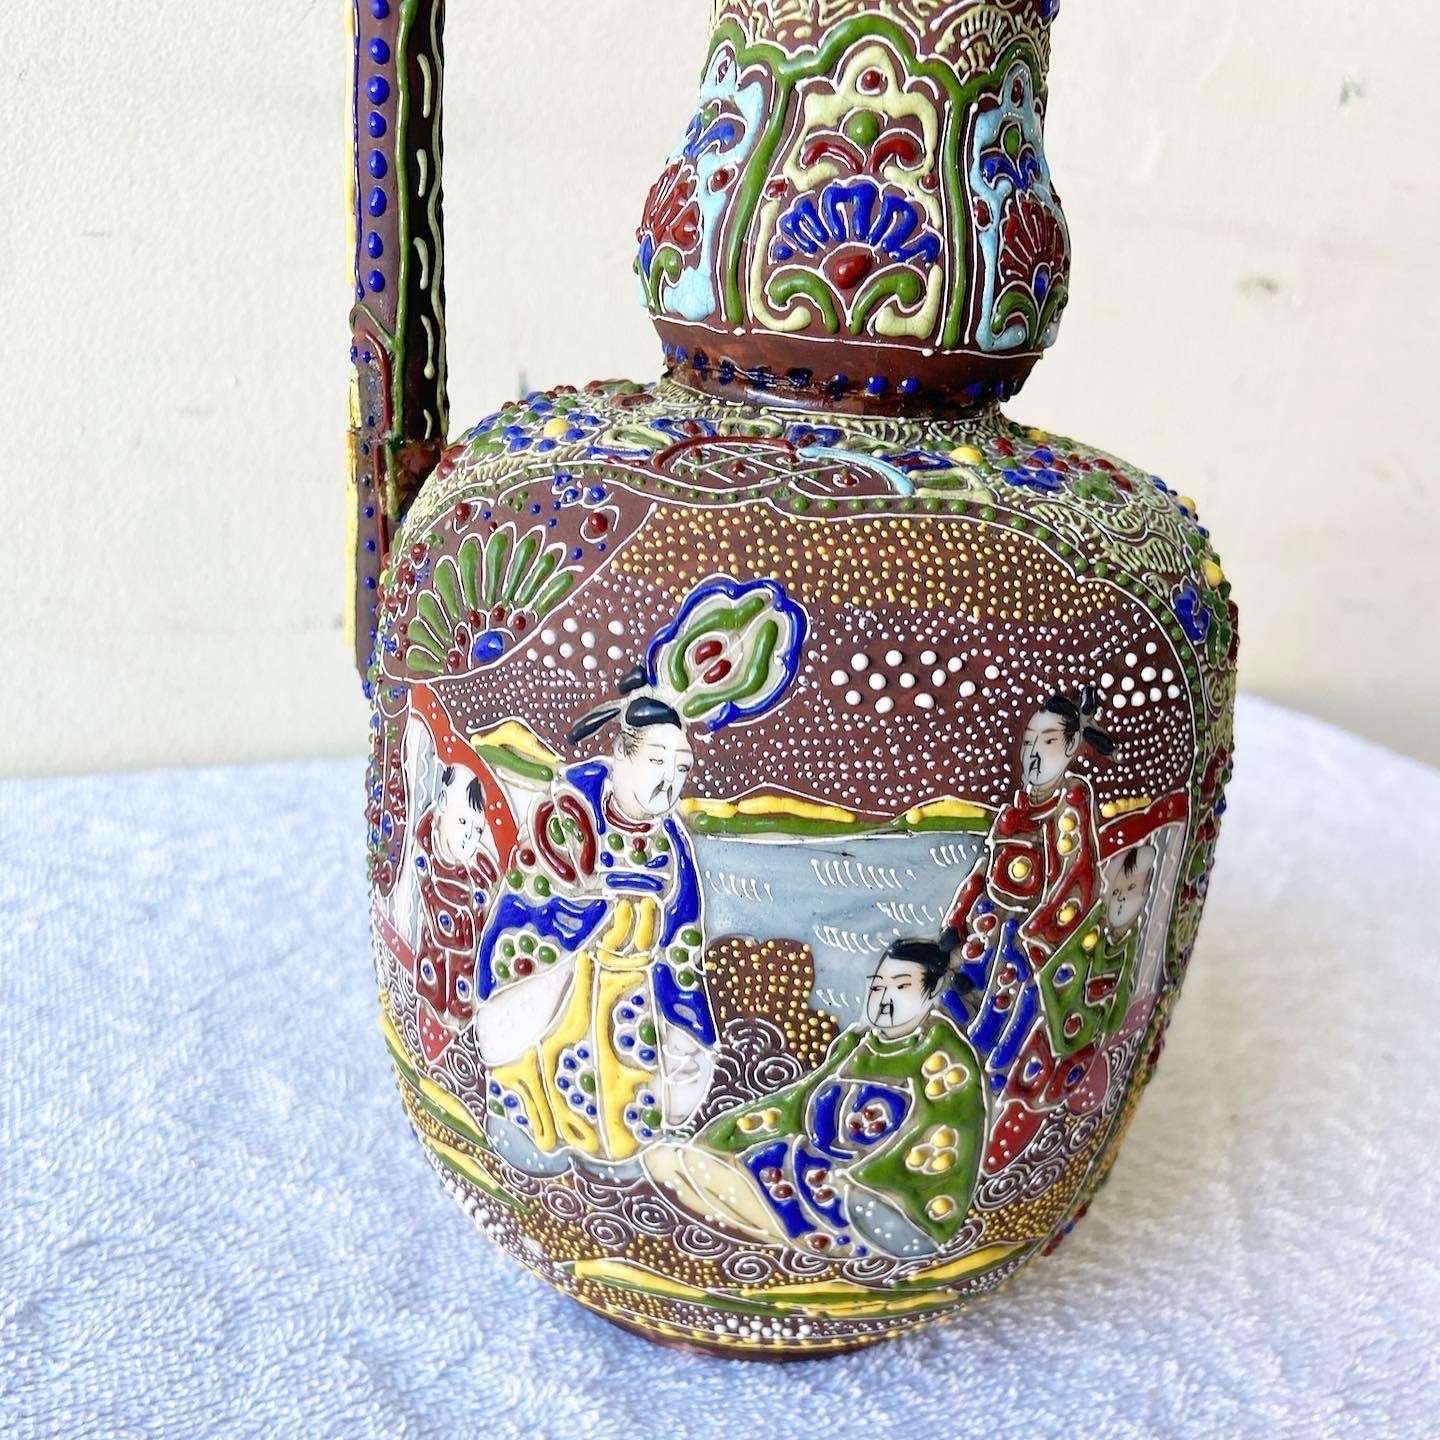 Amazing vintage Chinese pitcher. Features a hand painted and enameled design vibrant with green, red, yellow and blue, depicting a royal way of life.
